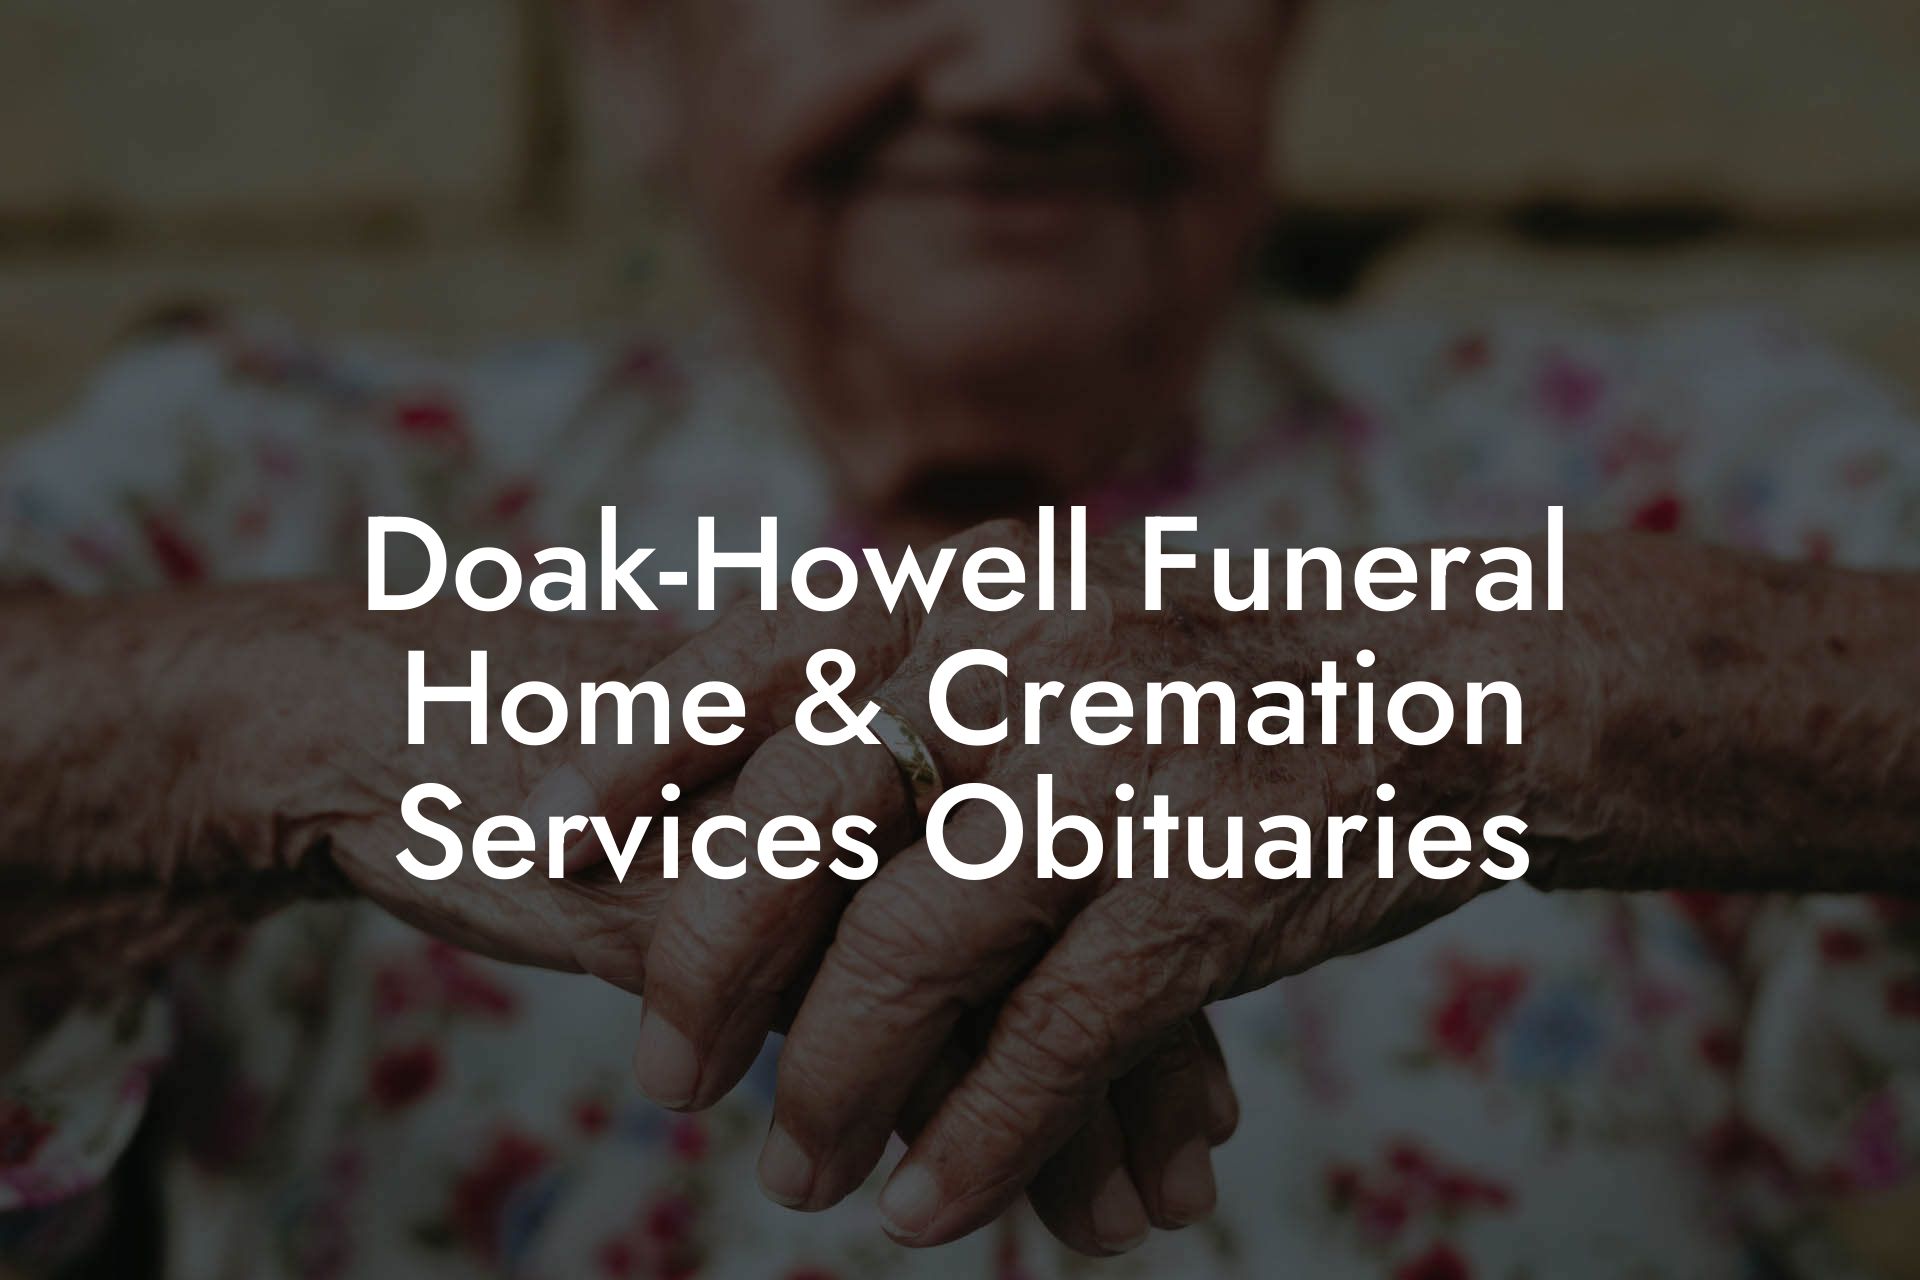 Doak-Howell Funeral Home & Cremation Services Obituaries